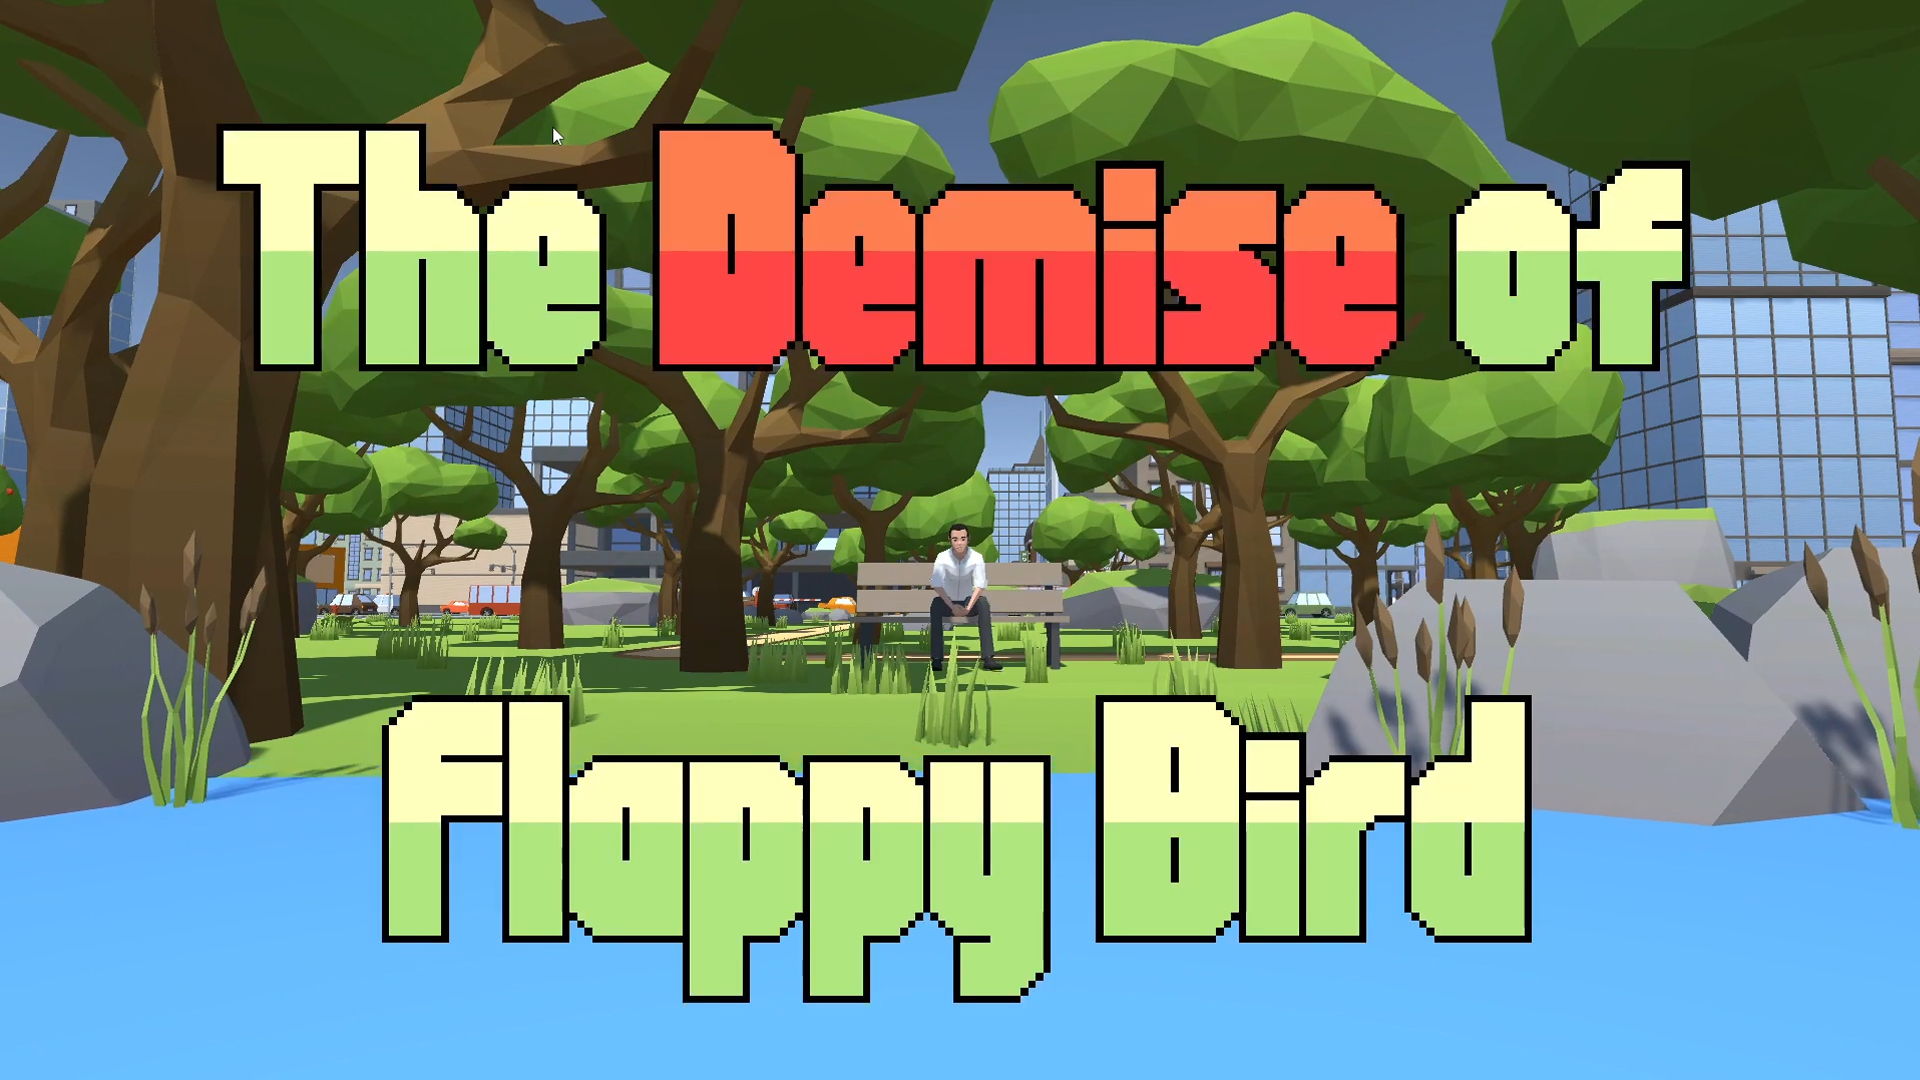 The Demise of Flappy Bird